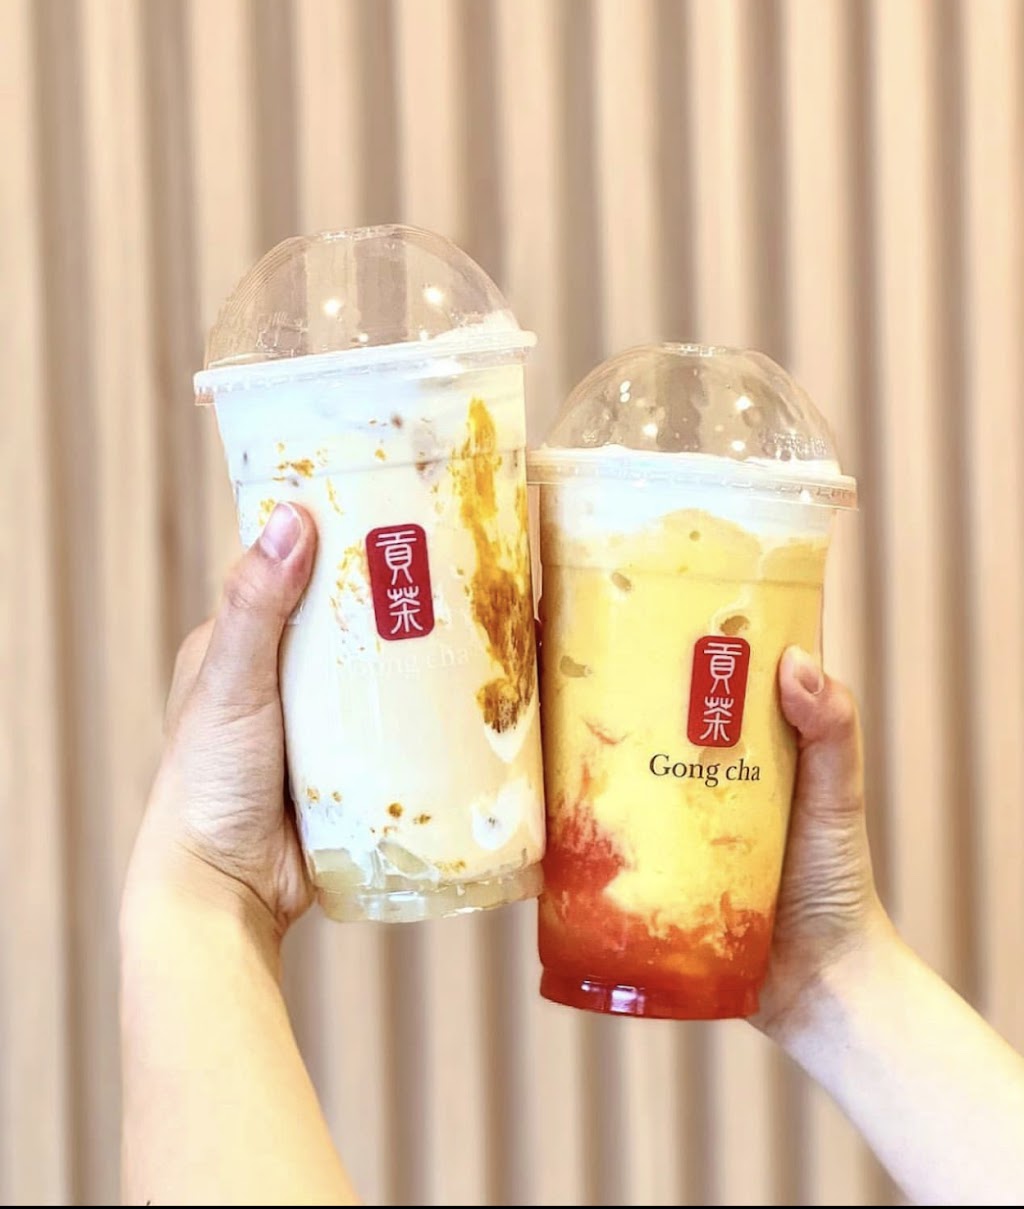 Gong Cha Whitby | cafe | 20 Broadleaf Ave Unit B103, Whitby, ON L1R 0B5, Canada | 9054258881 OR +1 905-425-8881